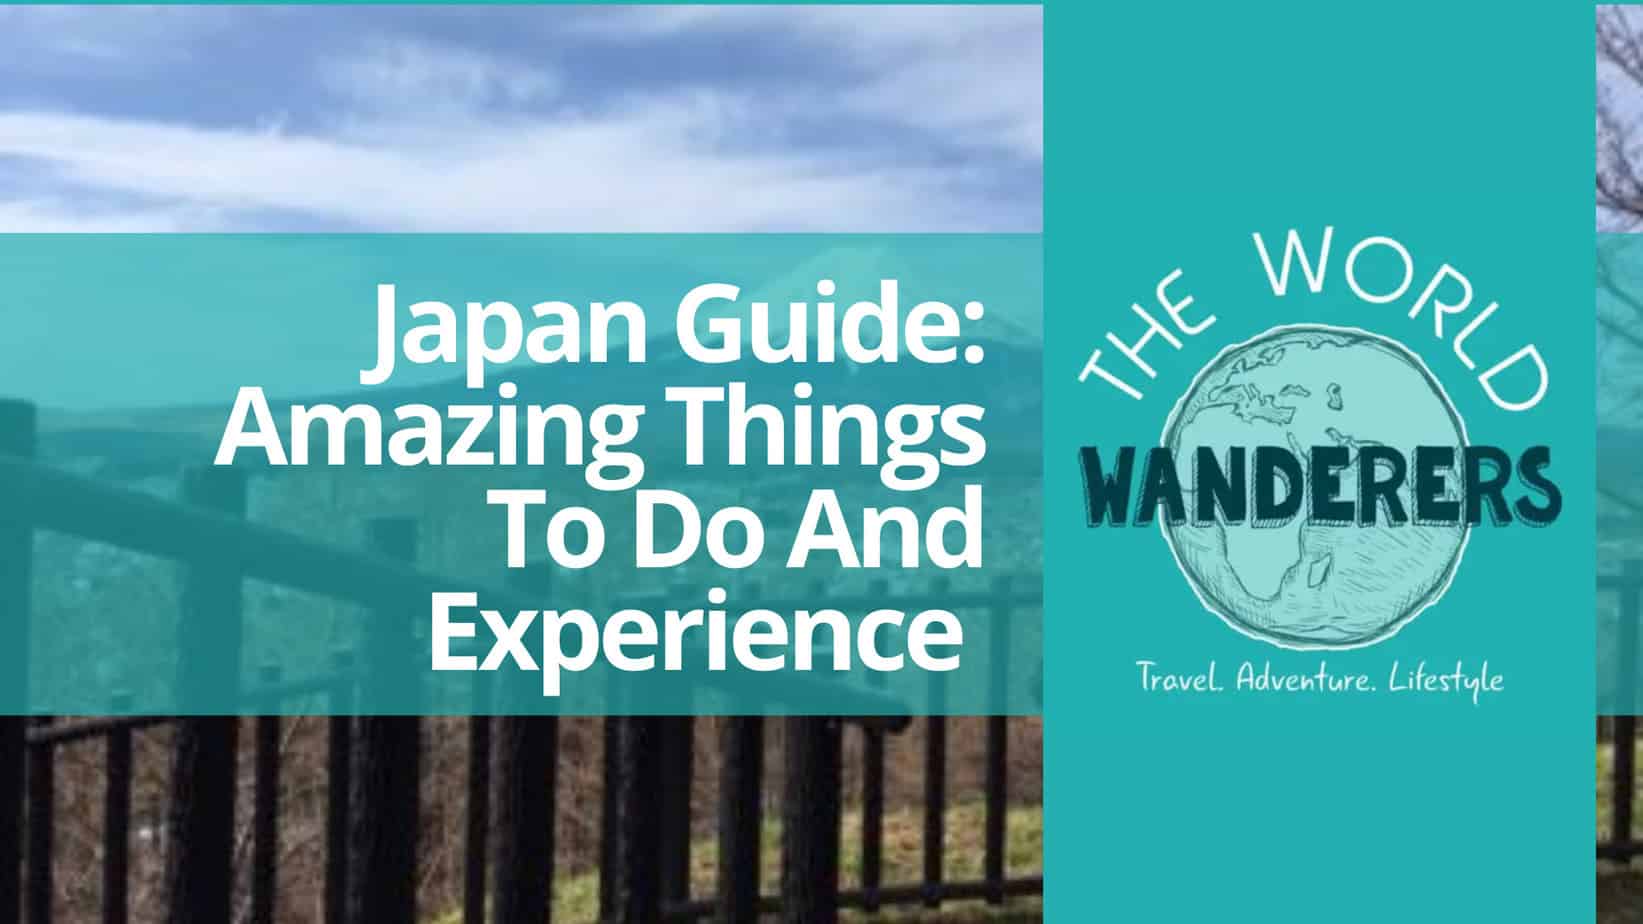 Japan Guide Amazing Things To Do And Experience